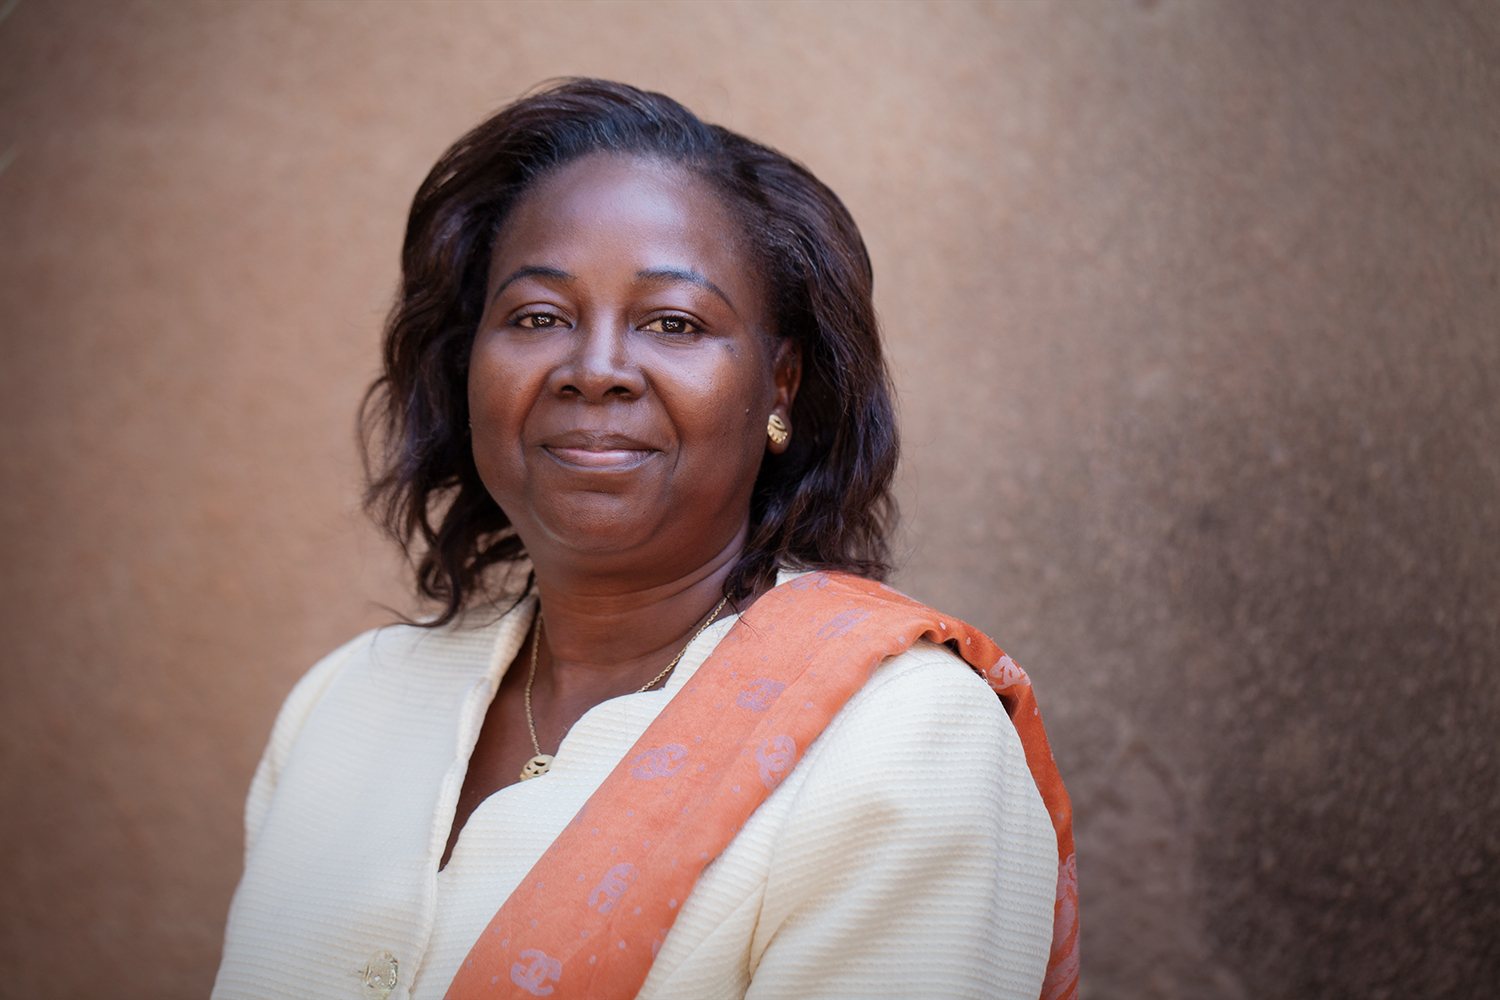 Hortence Lougué photographed by Leila Alaoui in Ouagadougou, Burkina Faso, on 12 January 2016, as part of the My Body My Rights campaign. Her organisation, Association d’appui et d’eveil PUGSADA, works on issues around gender-based violence, education and human rights. She works with young girls and women who have been forced into marriage, including at a very young age, and female genital mutilation. Her organisation currently has projects to support the education of girls who face early and forced marriage.